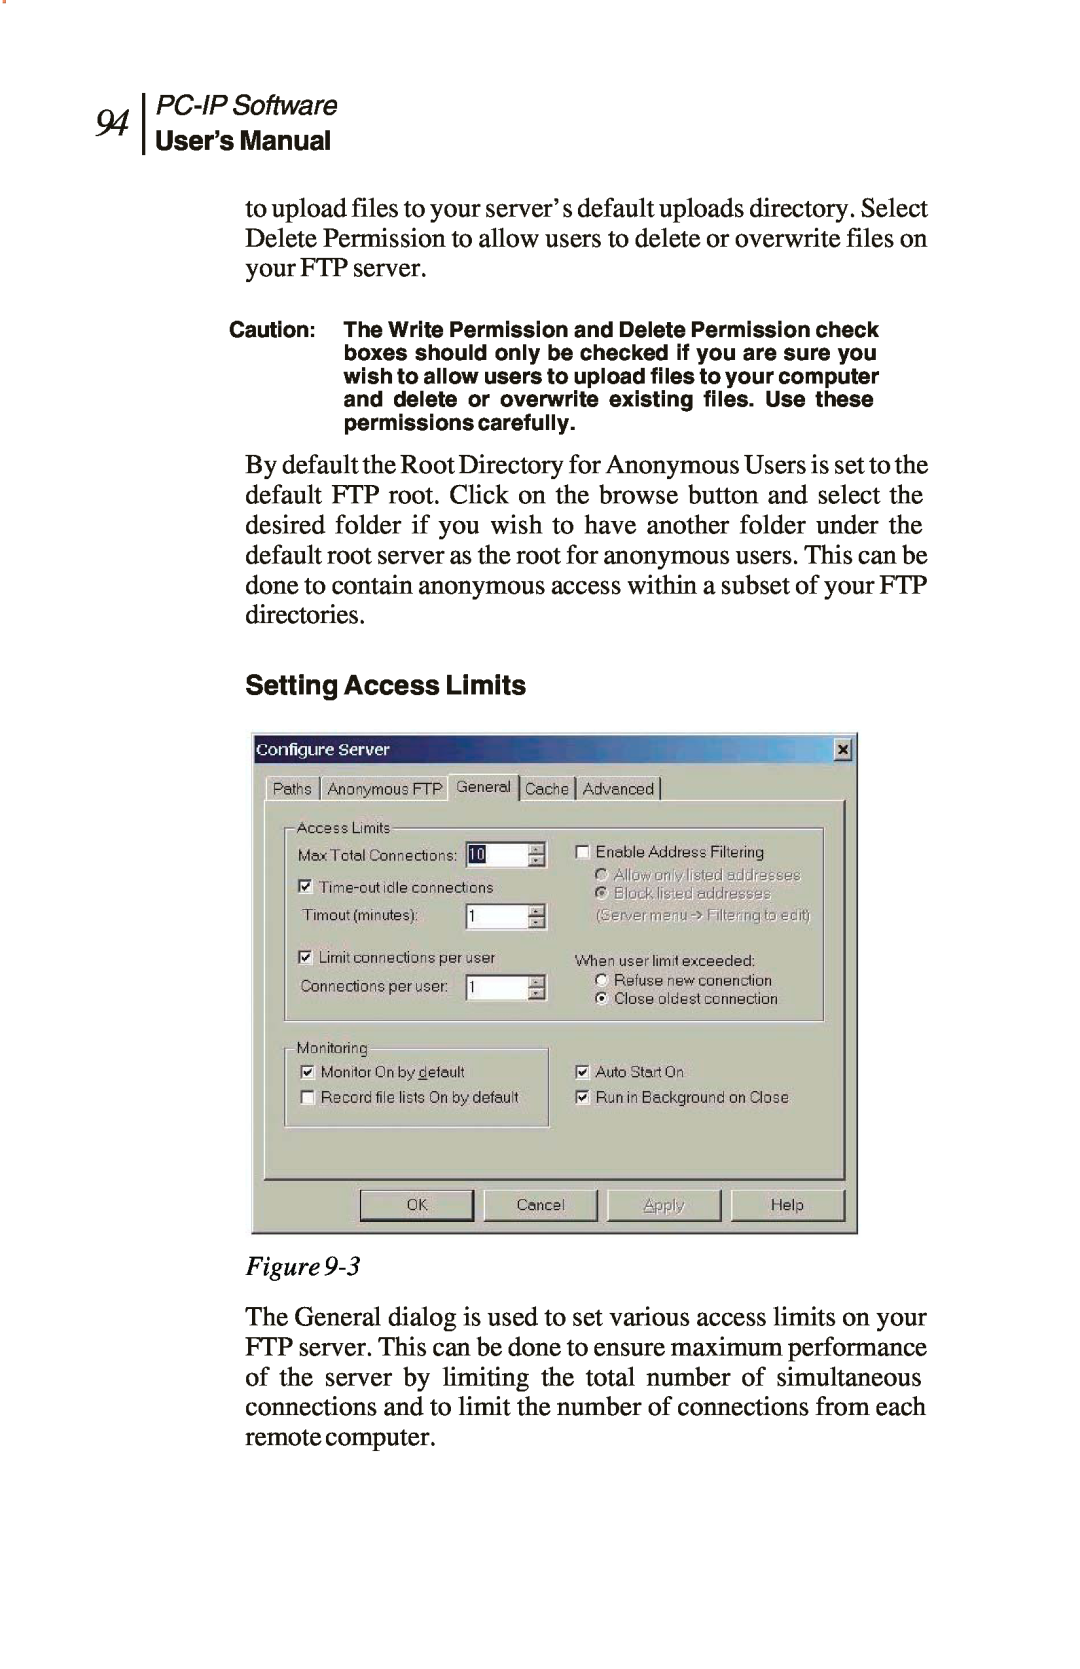 Sunrise Global and CM500 IP, CM250 IP, CM100 IP manual Setting Access Limits, PC-IPSoftware, User’s Manual, Figure 